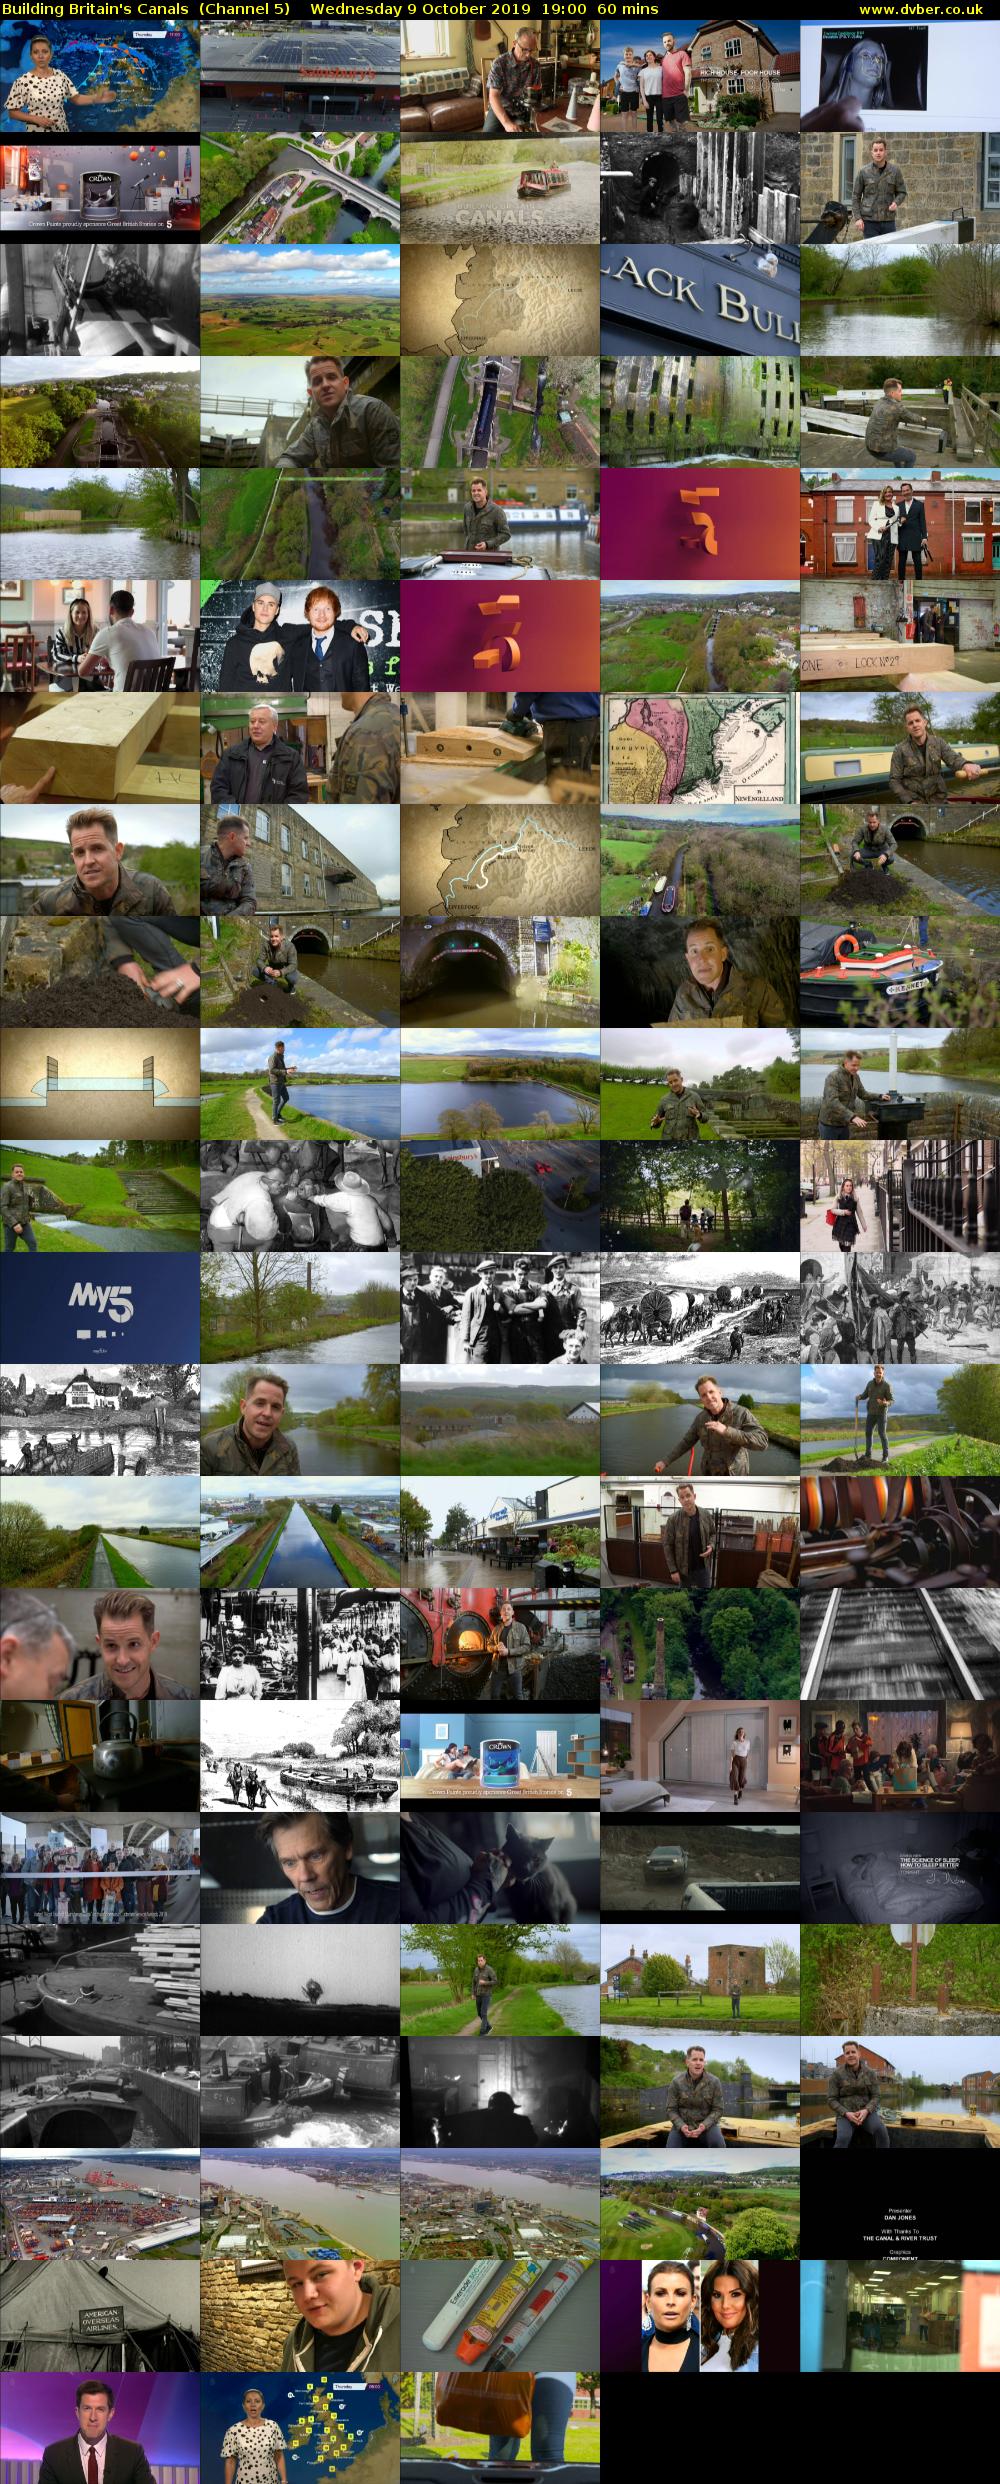 Building Britain's Canals  (Channel 5) Wednesday 9 October 2019 19:00 - 20:00